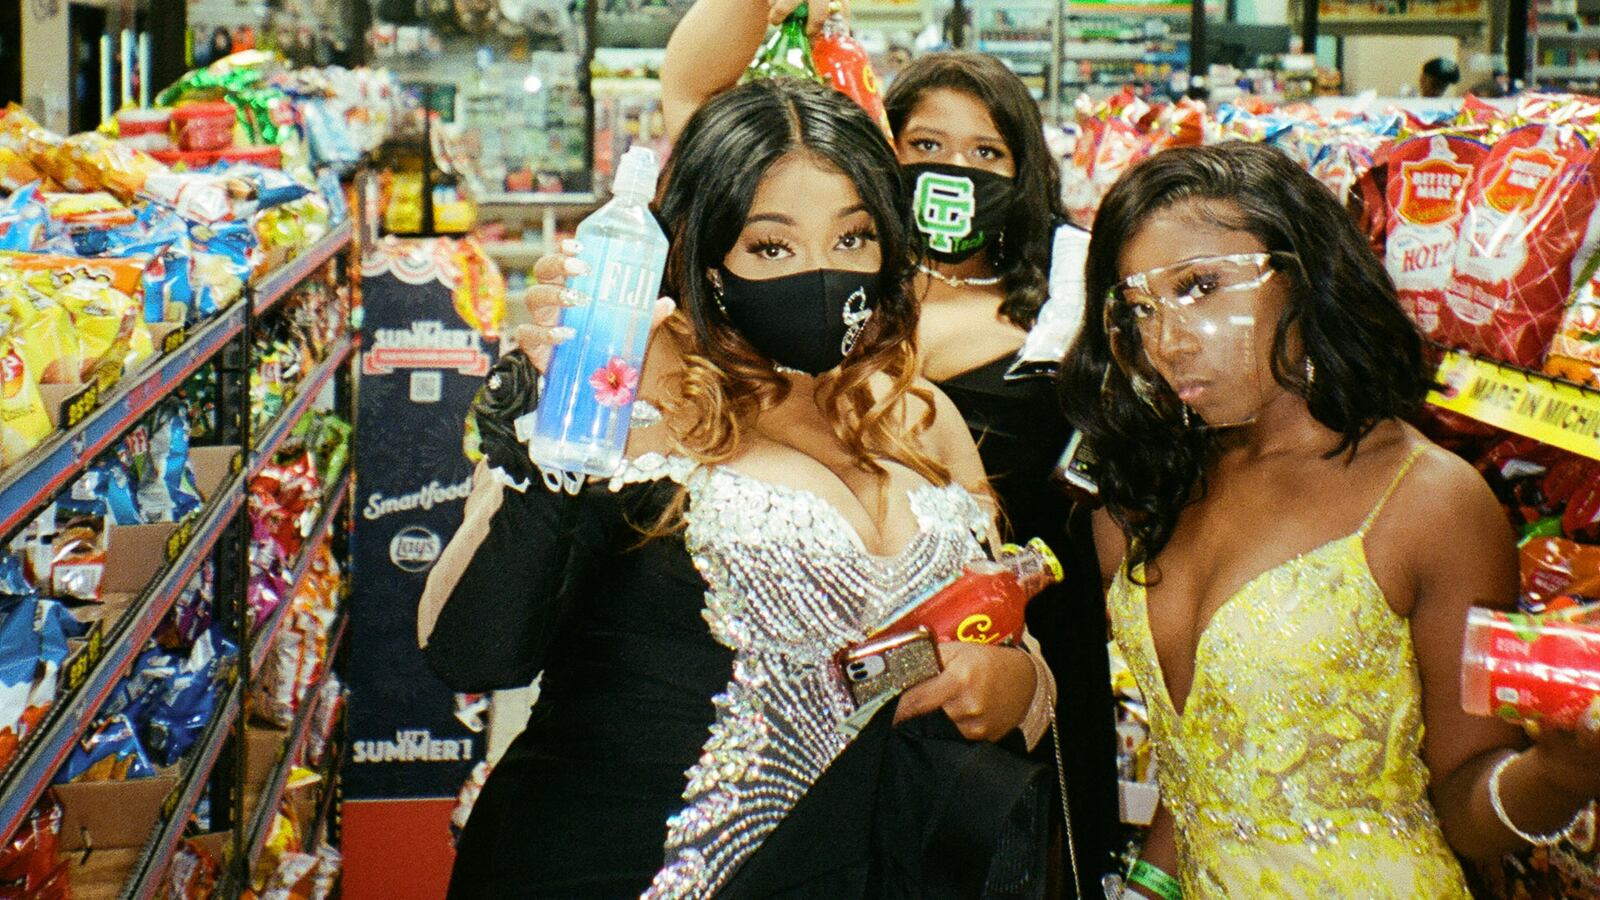 Three young women pose for a picture together wearing their ornate prom dresses and protective masks in a convenience store.